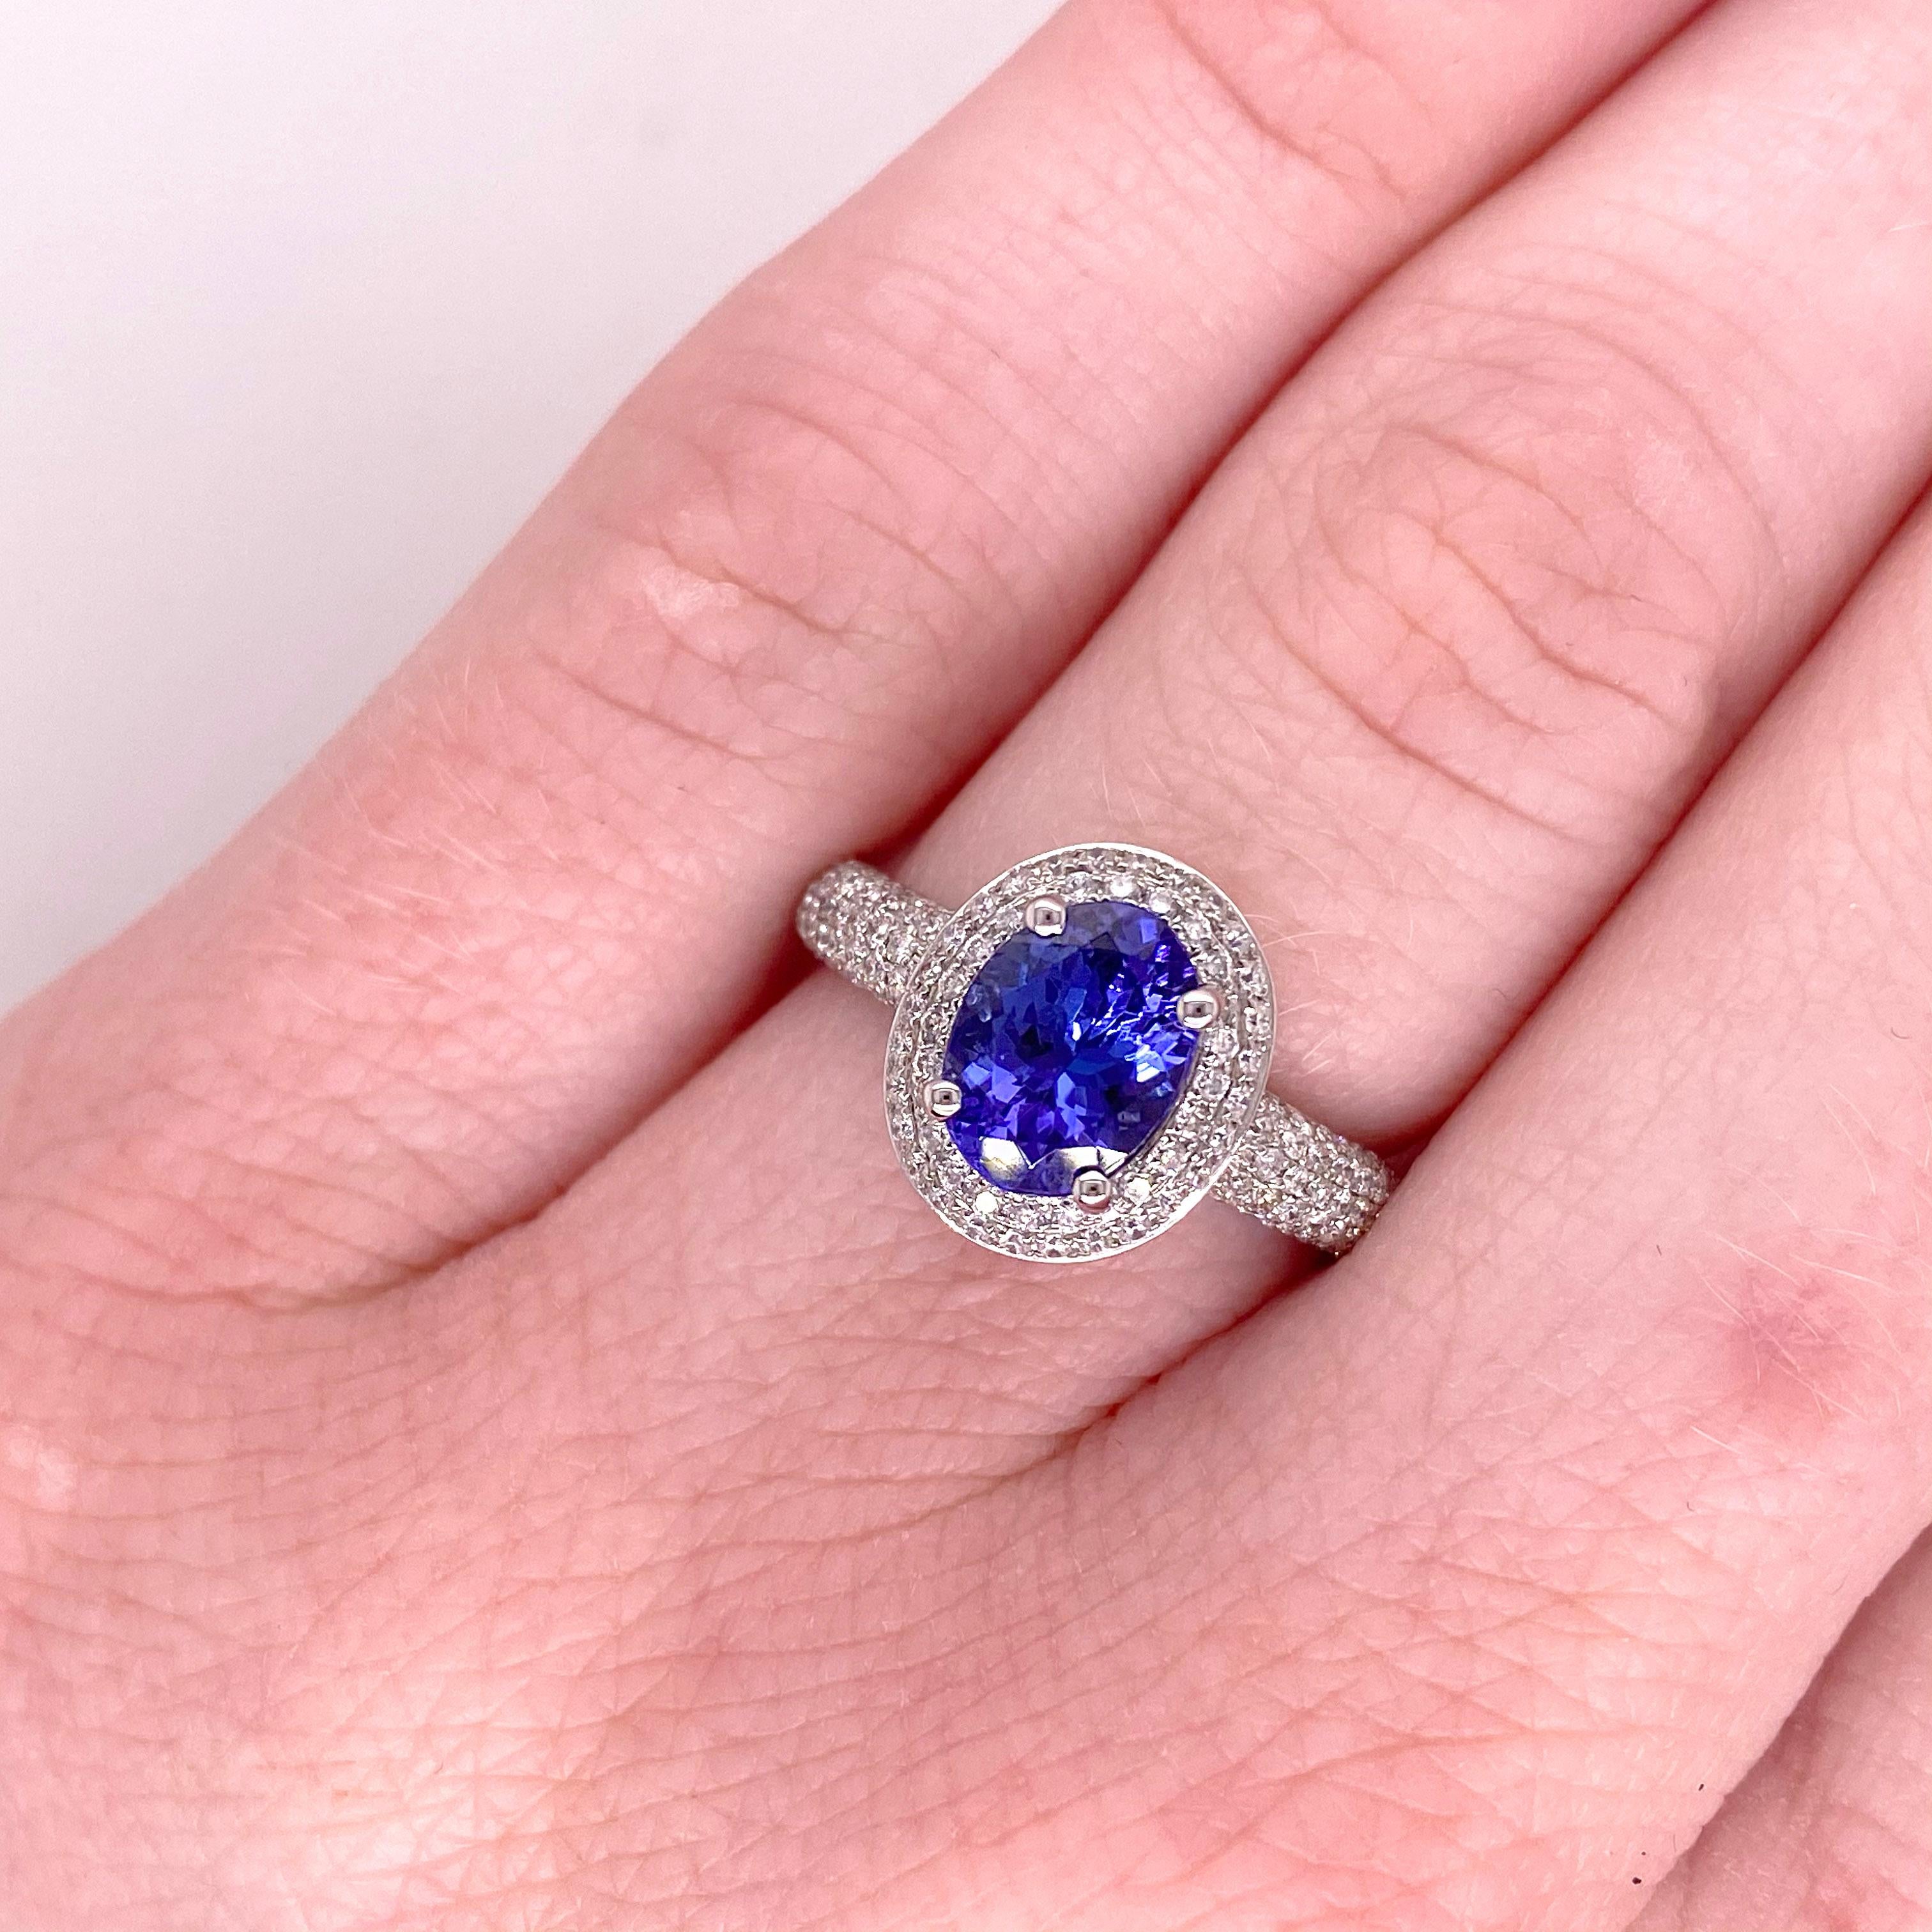 The details for this beautiful ring are listed below:
Metal Quality: 18 Karat White Gold
Diamond Number: 126
Diamond Total Weight: .58 Carat
Diamond Clarity: VS2
Diamond Color: F
Diamond Shape: Round Brilliant
Gemstone: Tanzanite
Gemstone Weight: